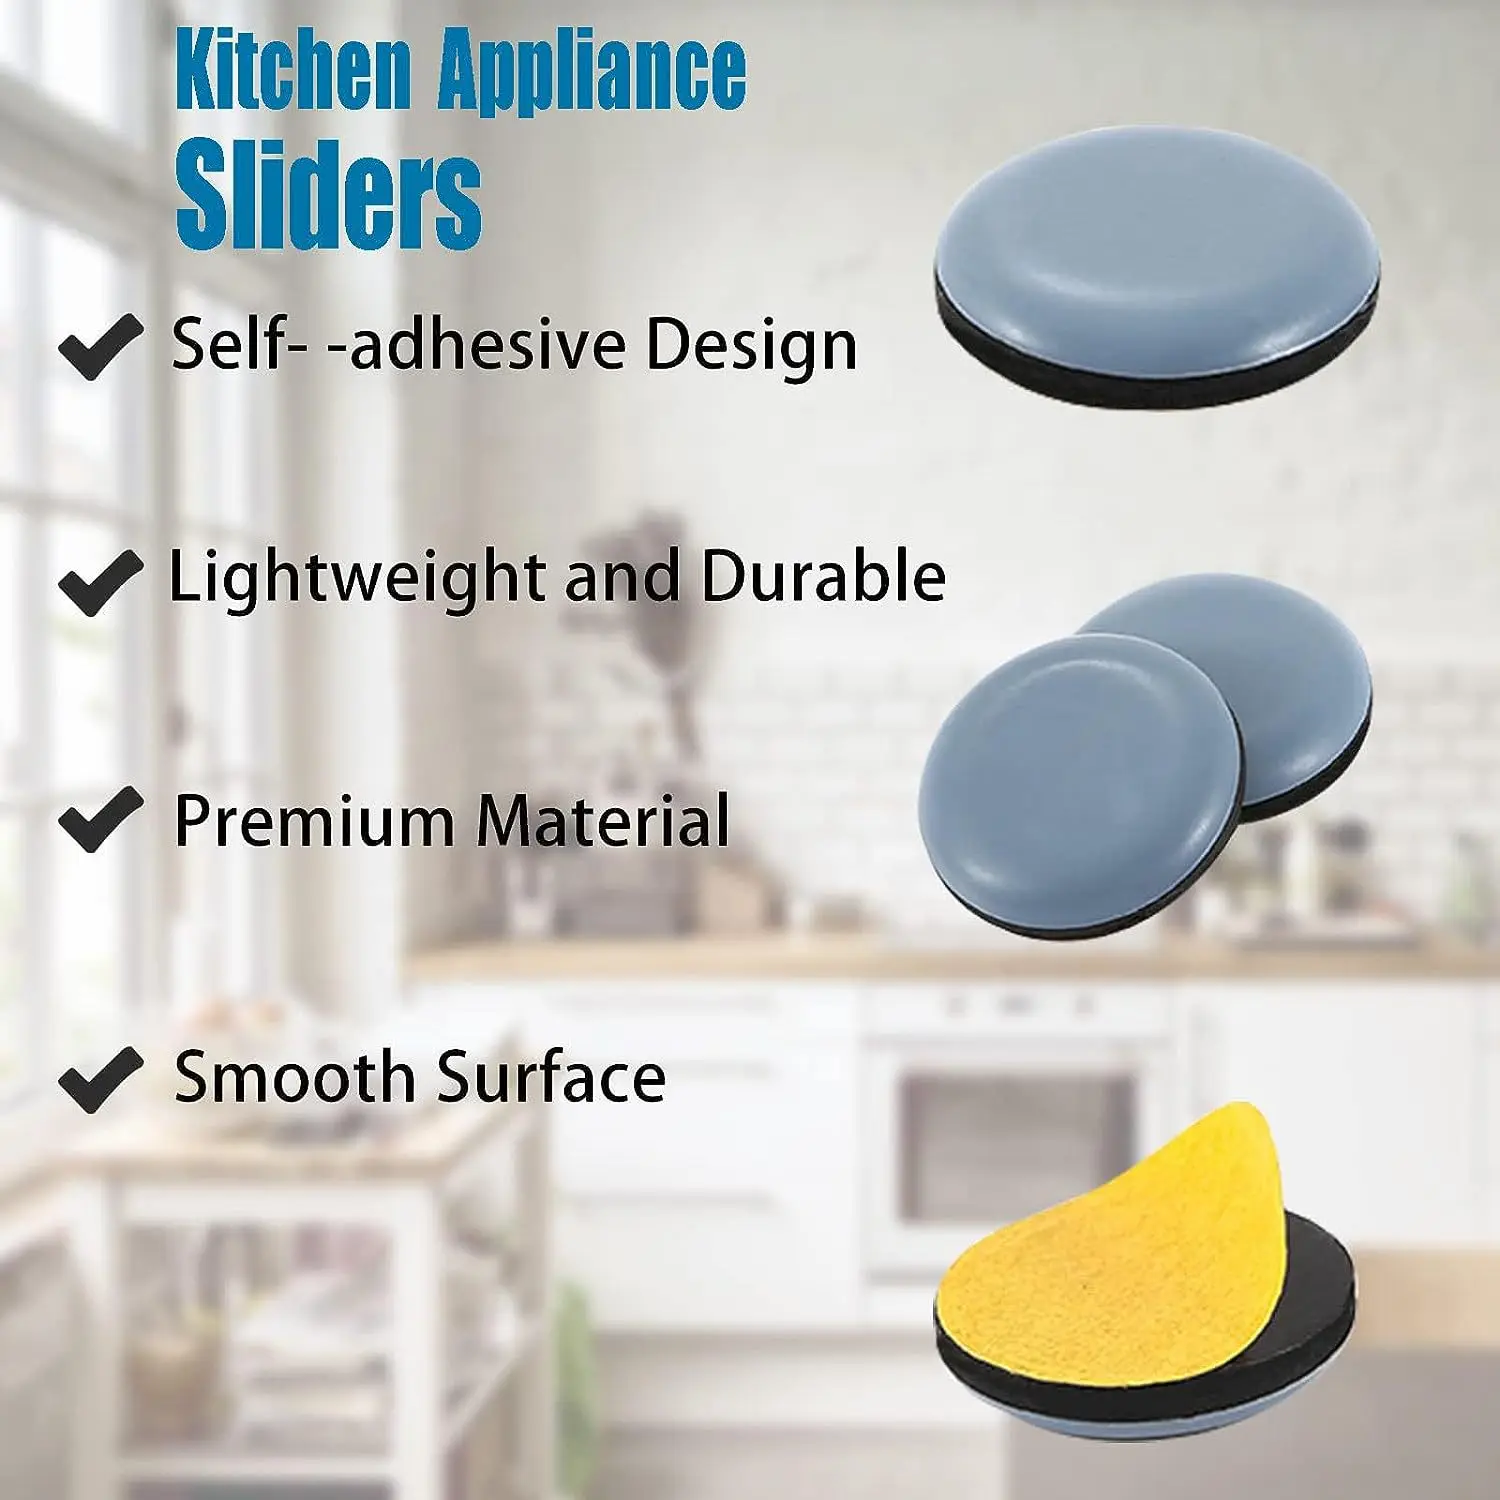 Appliance Sliders for Kitchen Appliances Self-adhesive Small Kitchen  Appliance Slider Kitchen Hacks Easy to MoIing & Space Savin - AliExpress